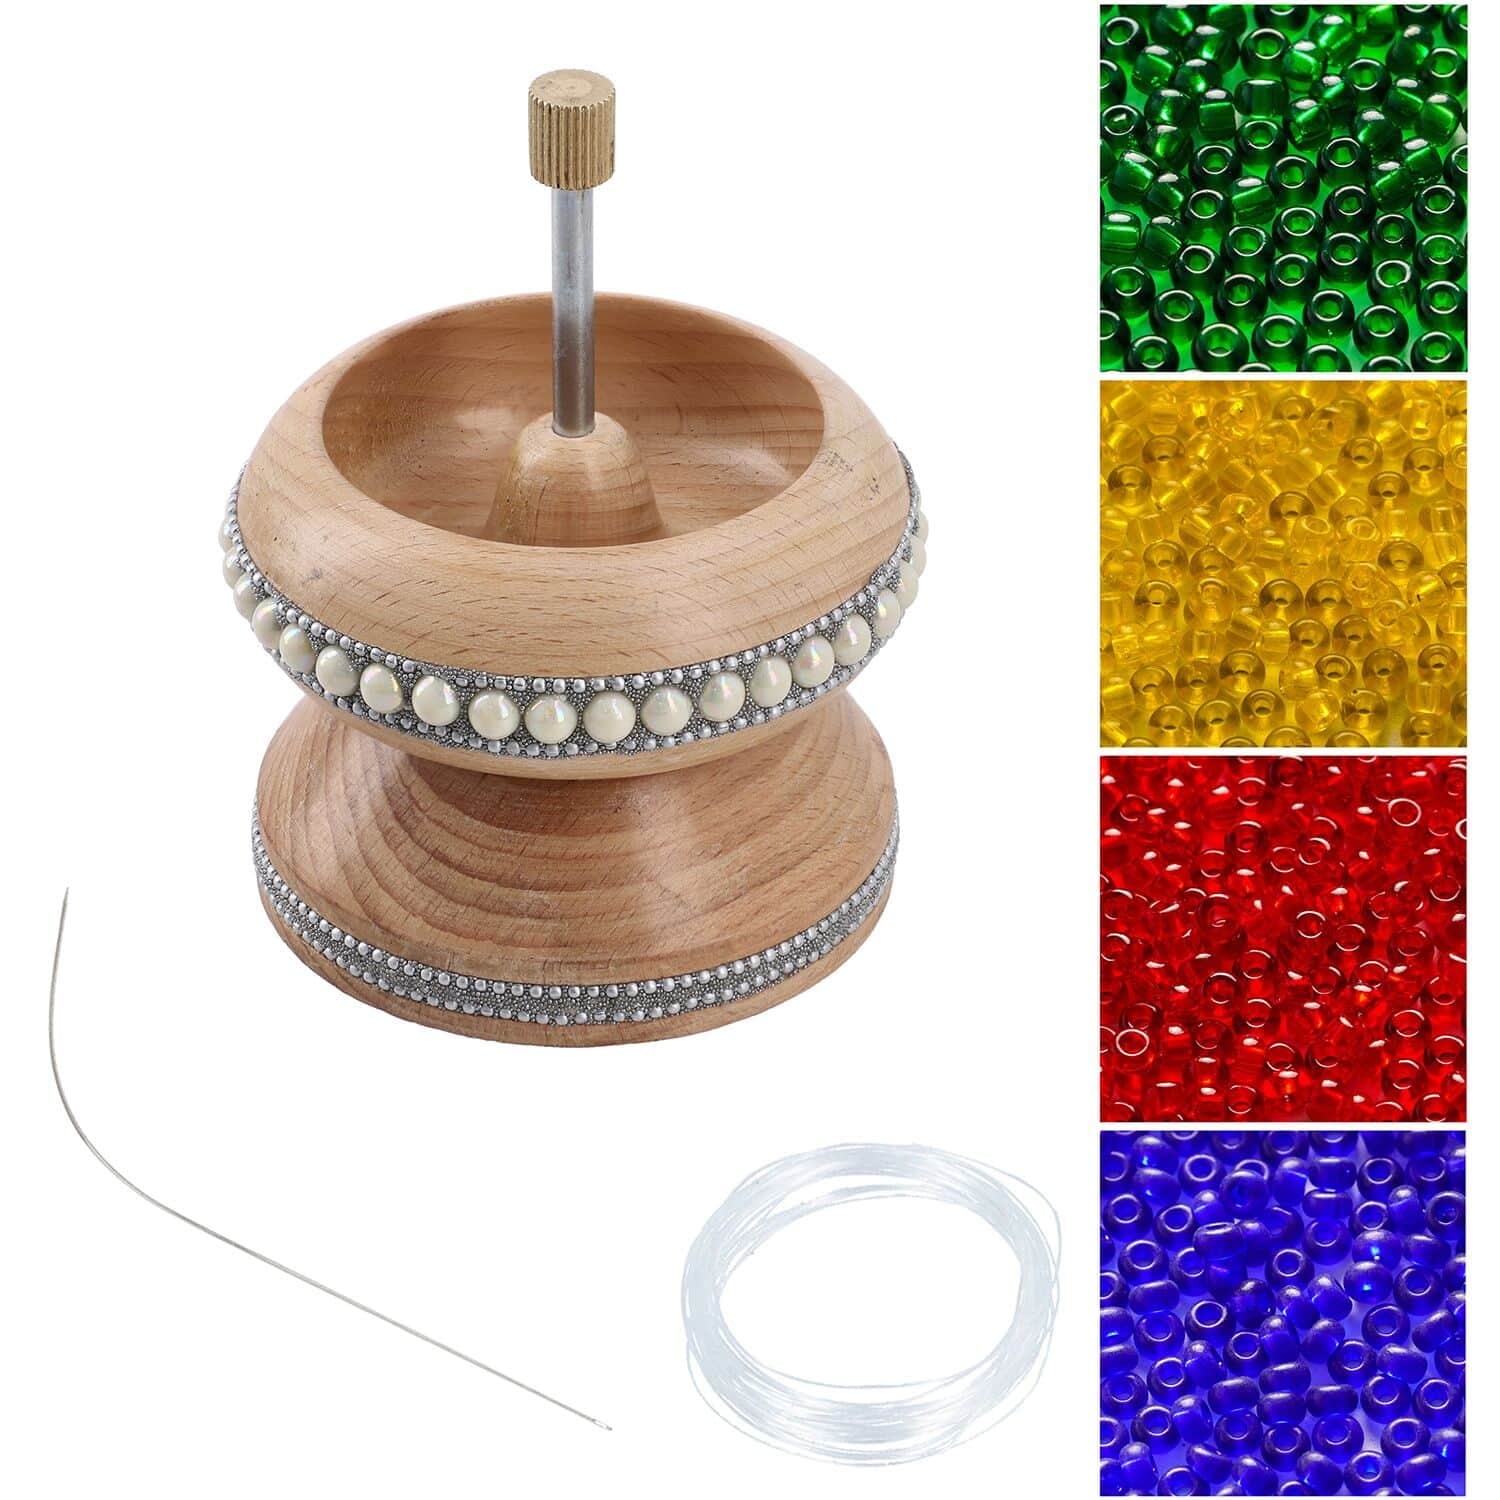  Keyzone Wooden Bead Spinner Kit, Bead Loader with 1000 PCS  Mixed Color Glass Seed Beads, 2 Large Eye Beading Needles and Threads, DIY  Seed Beads,Waist Beads,Bracelets and Necklaces